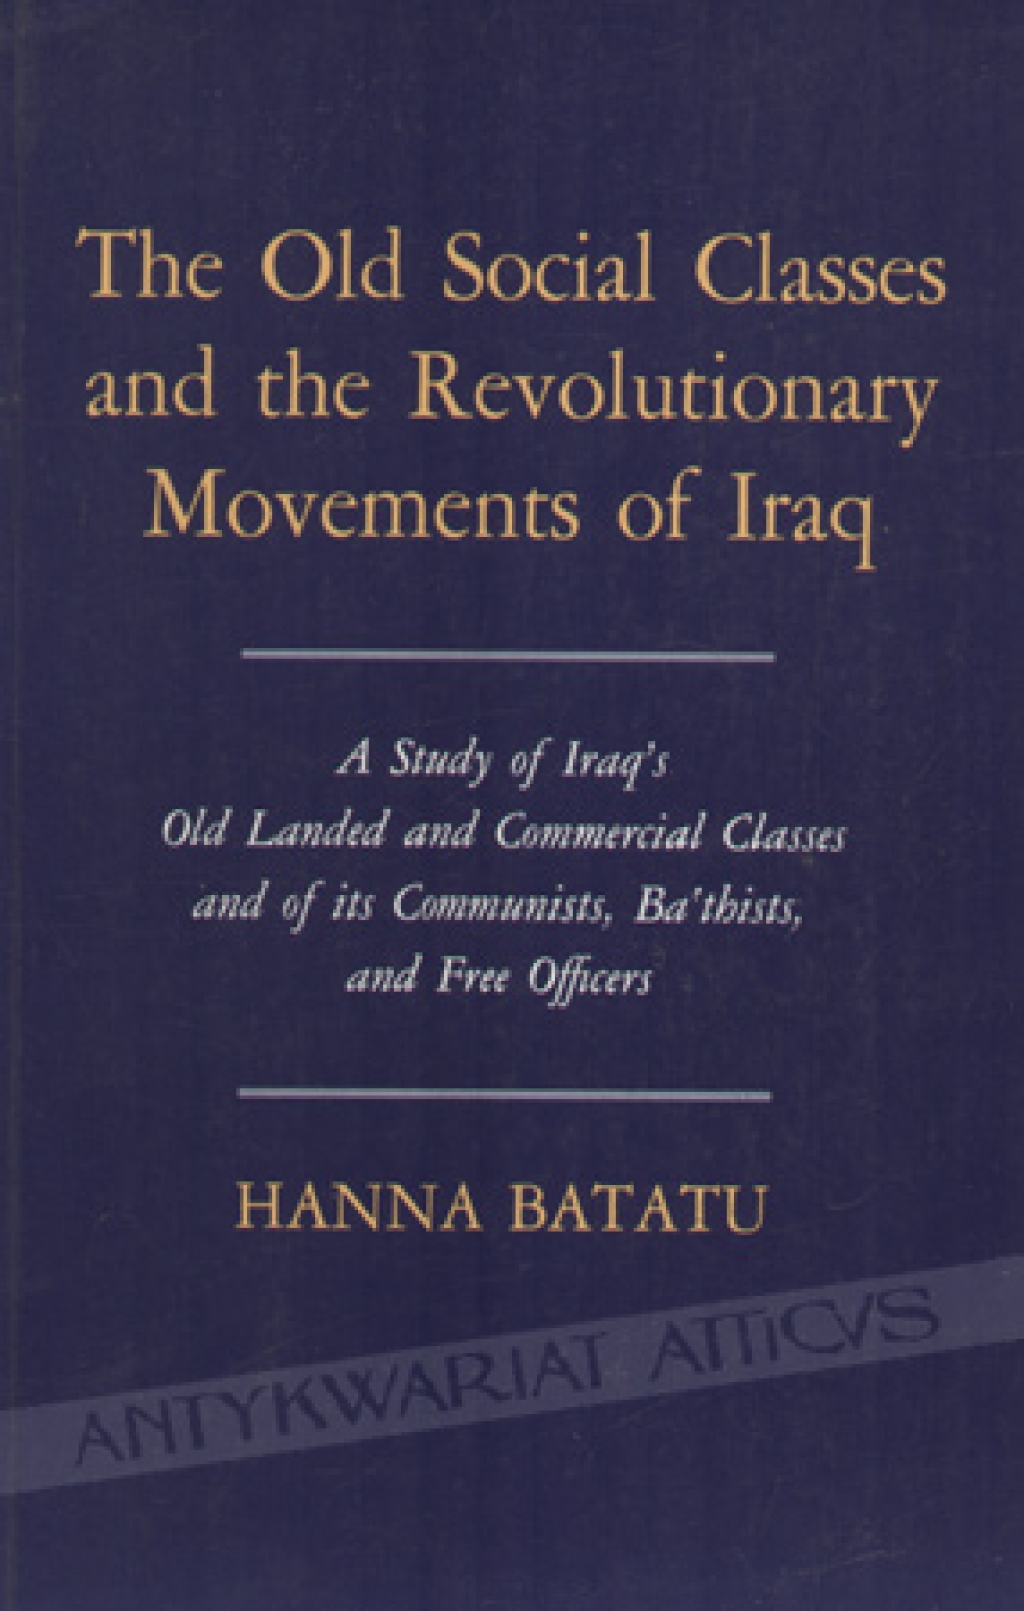 The Old Social Classes and the Revolutionary Movements of Iraq. A Study of Iraq\'s Old Landed and Commercial Classes and of its Communistrs, Ba\'thists and Free Officers